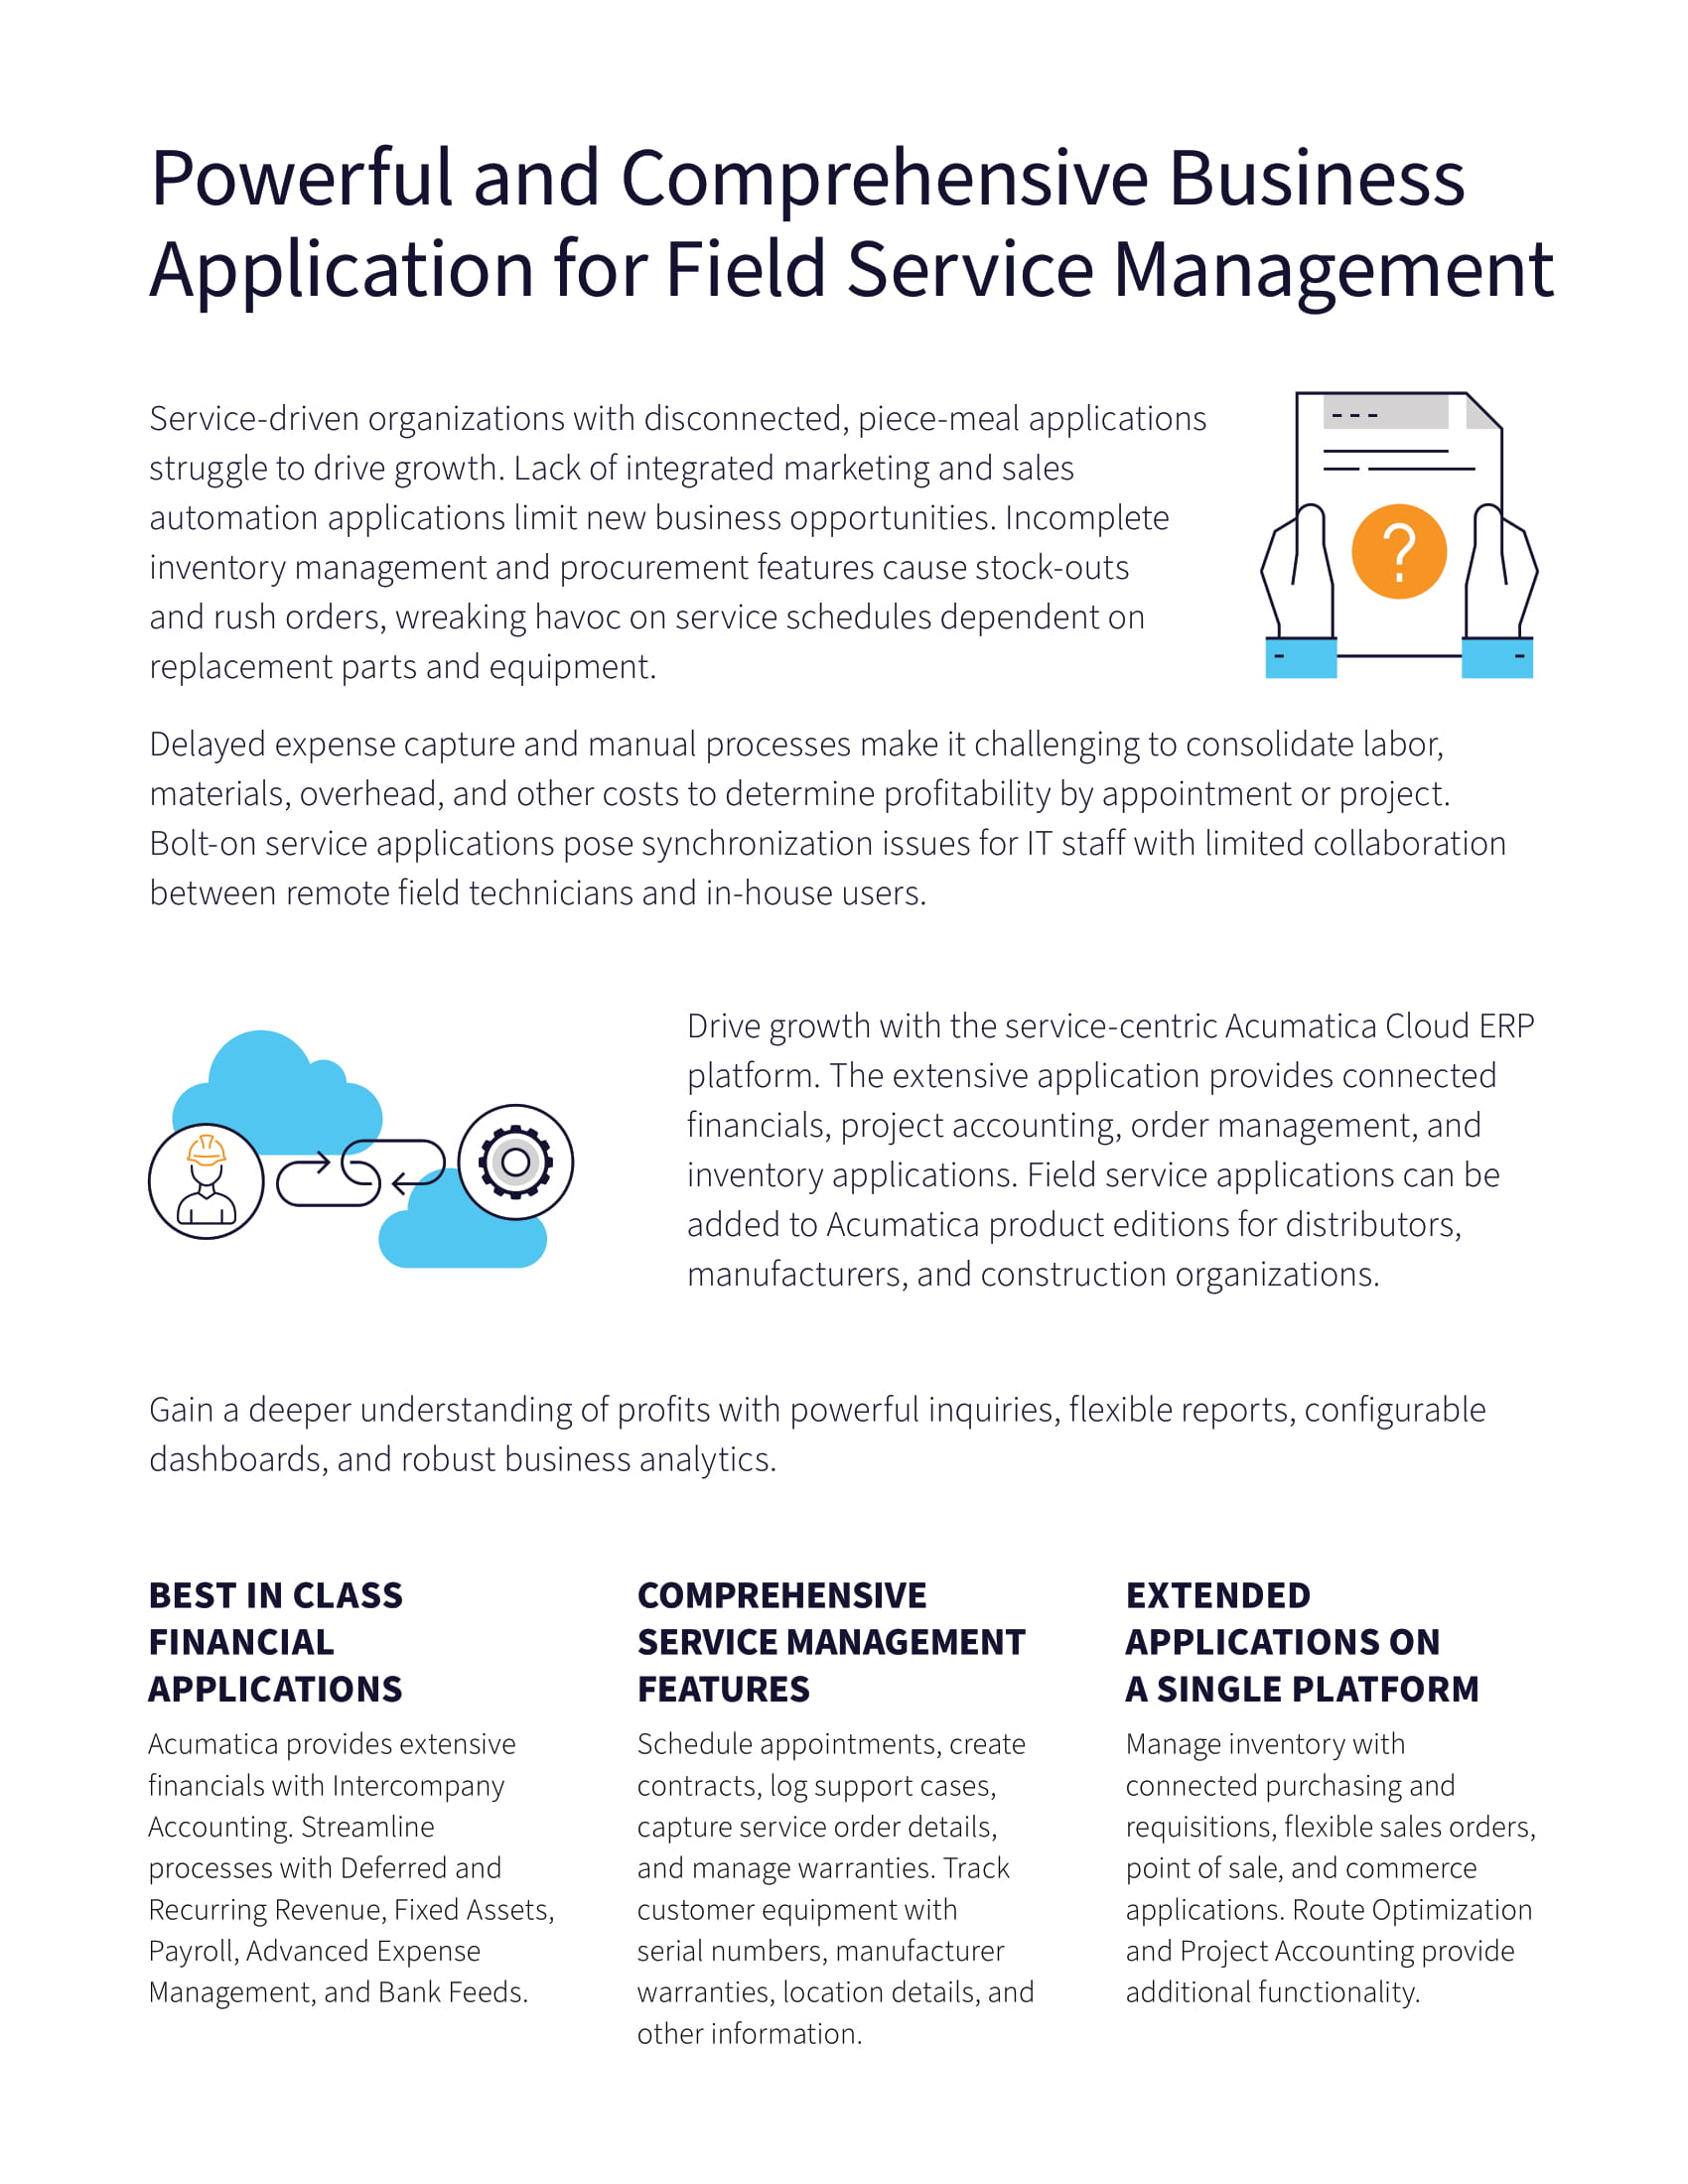 Mobile Field Service ERP: Find Your Ideal Solution, page 1